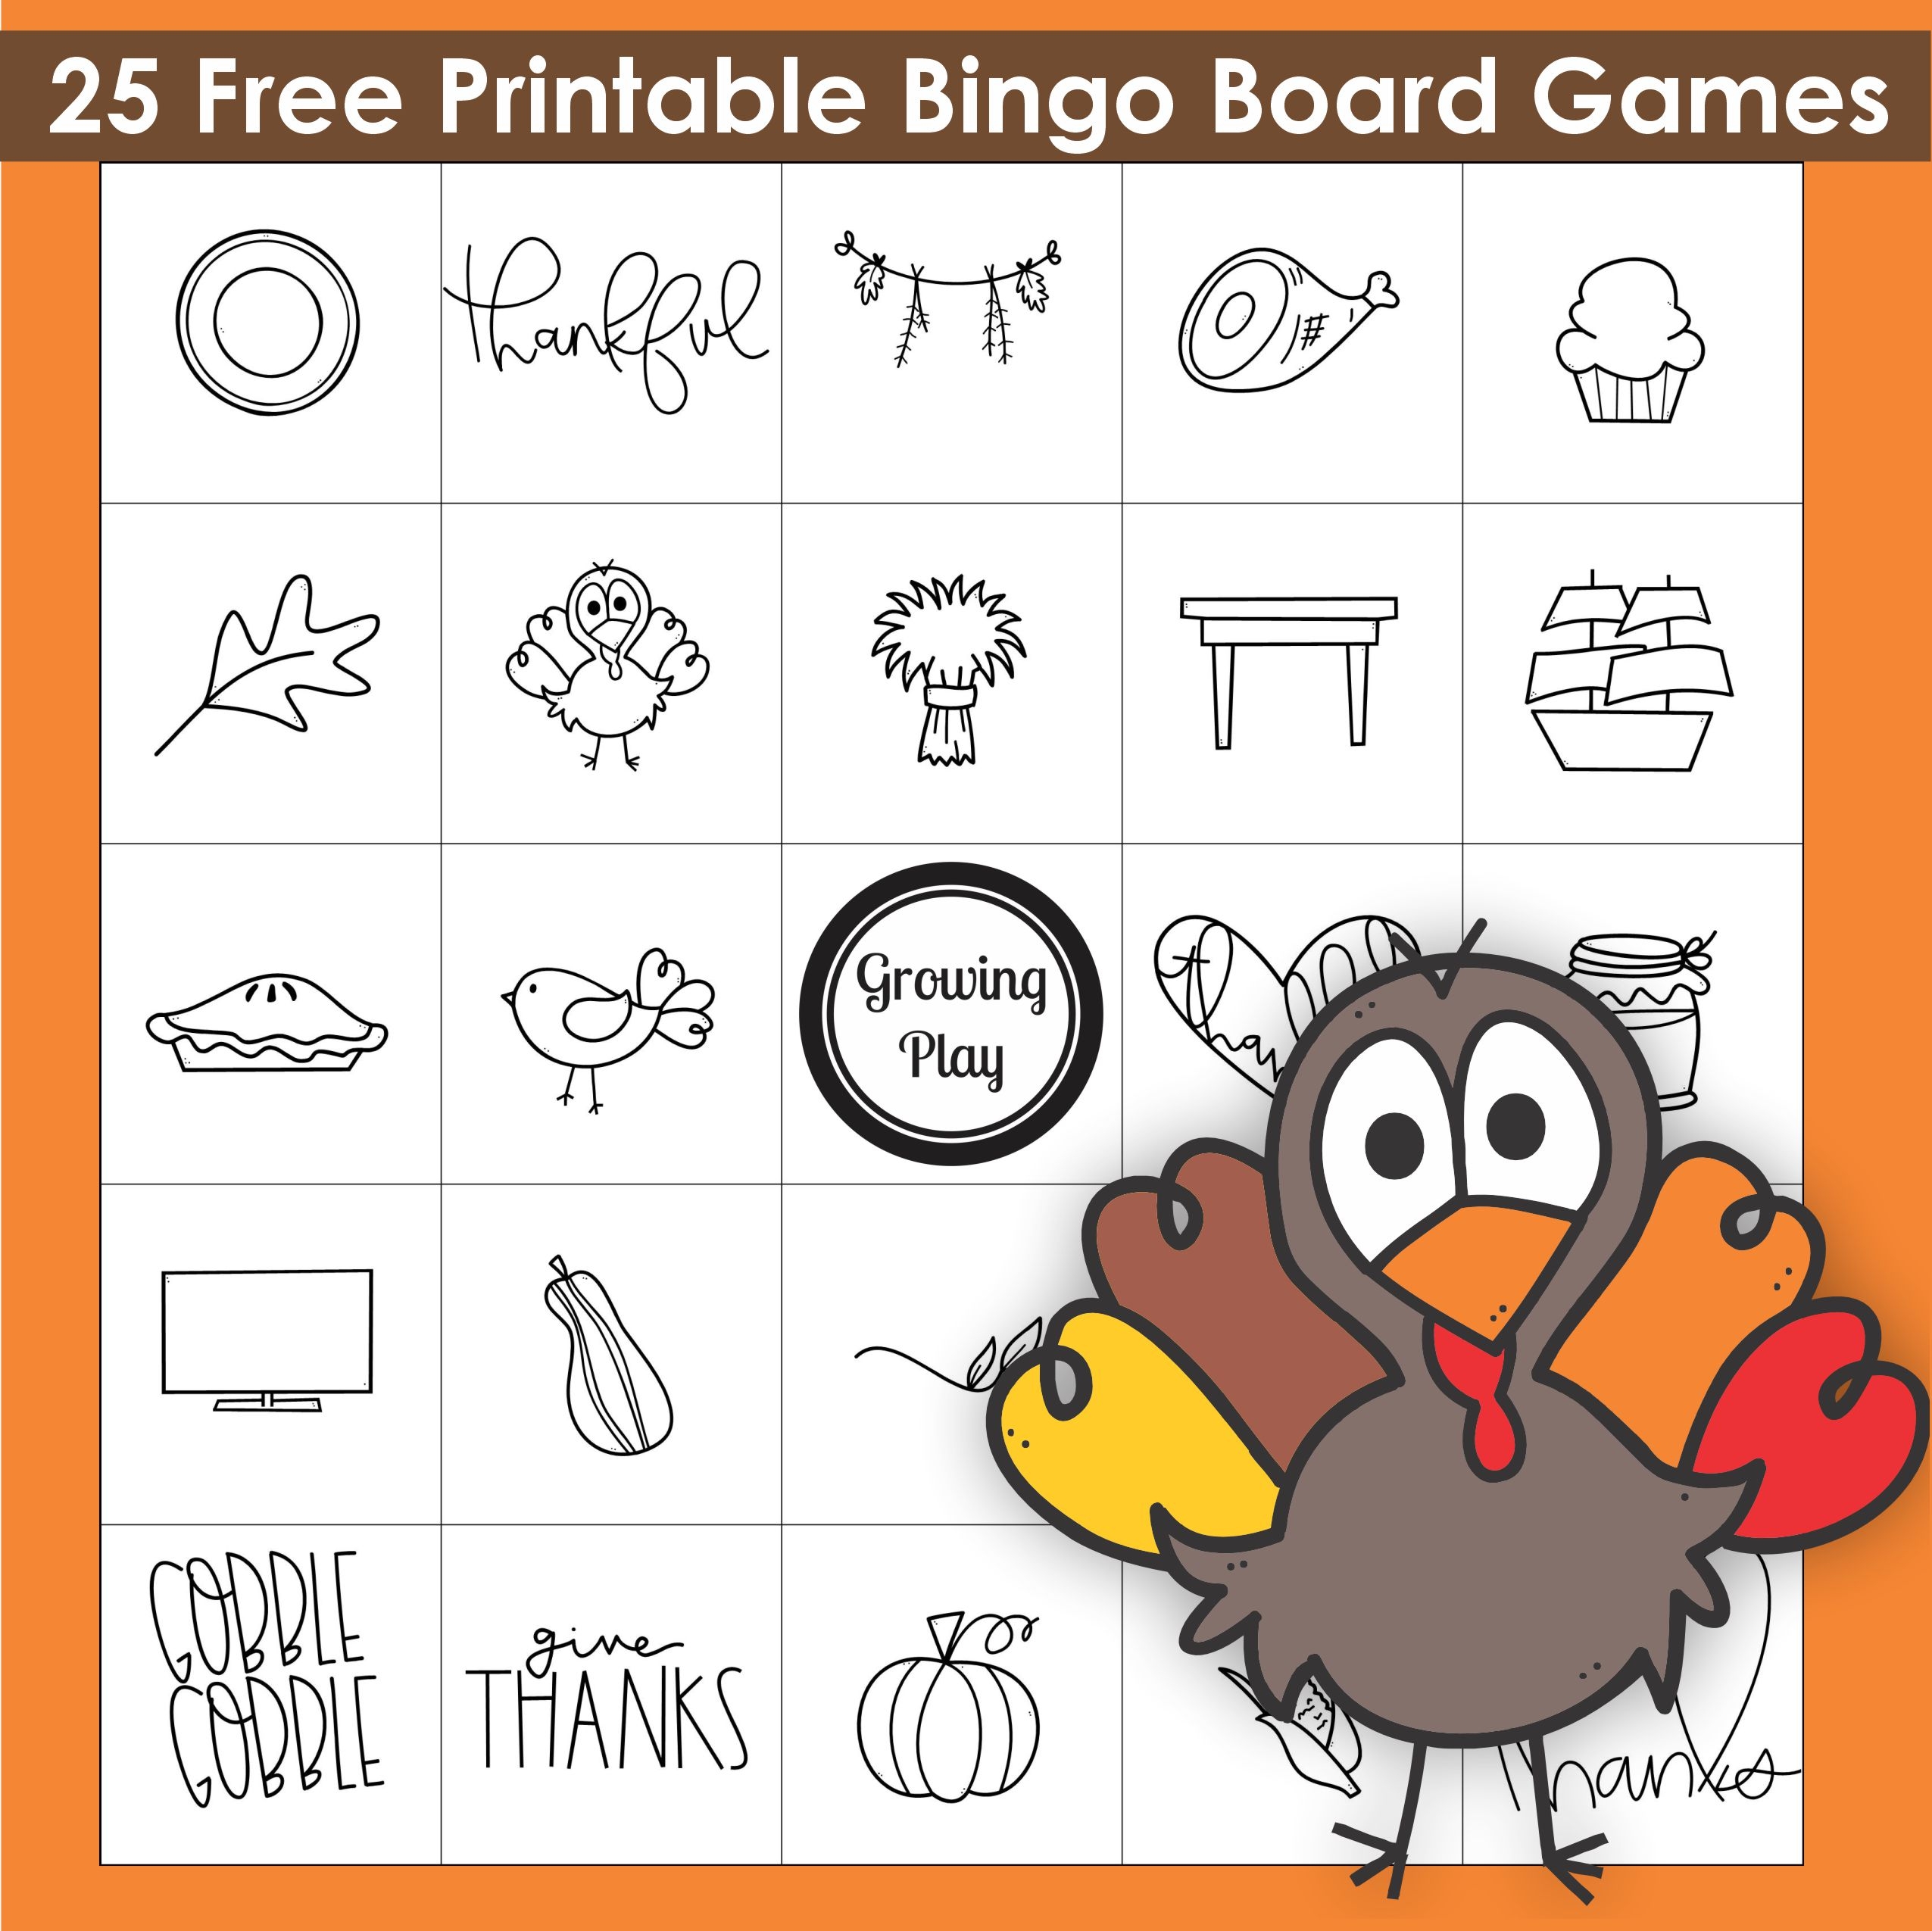 Free Printable Thanksgiving Bingo Cards For Large Groups Growing Play - Free Printable Bingo Cards For Large Groups